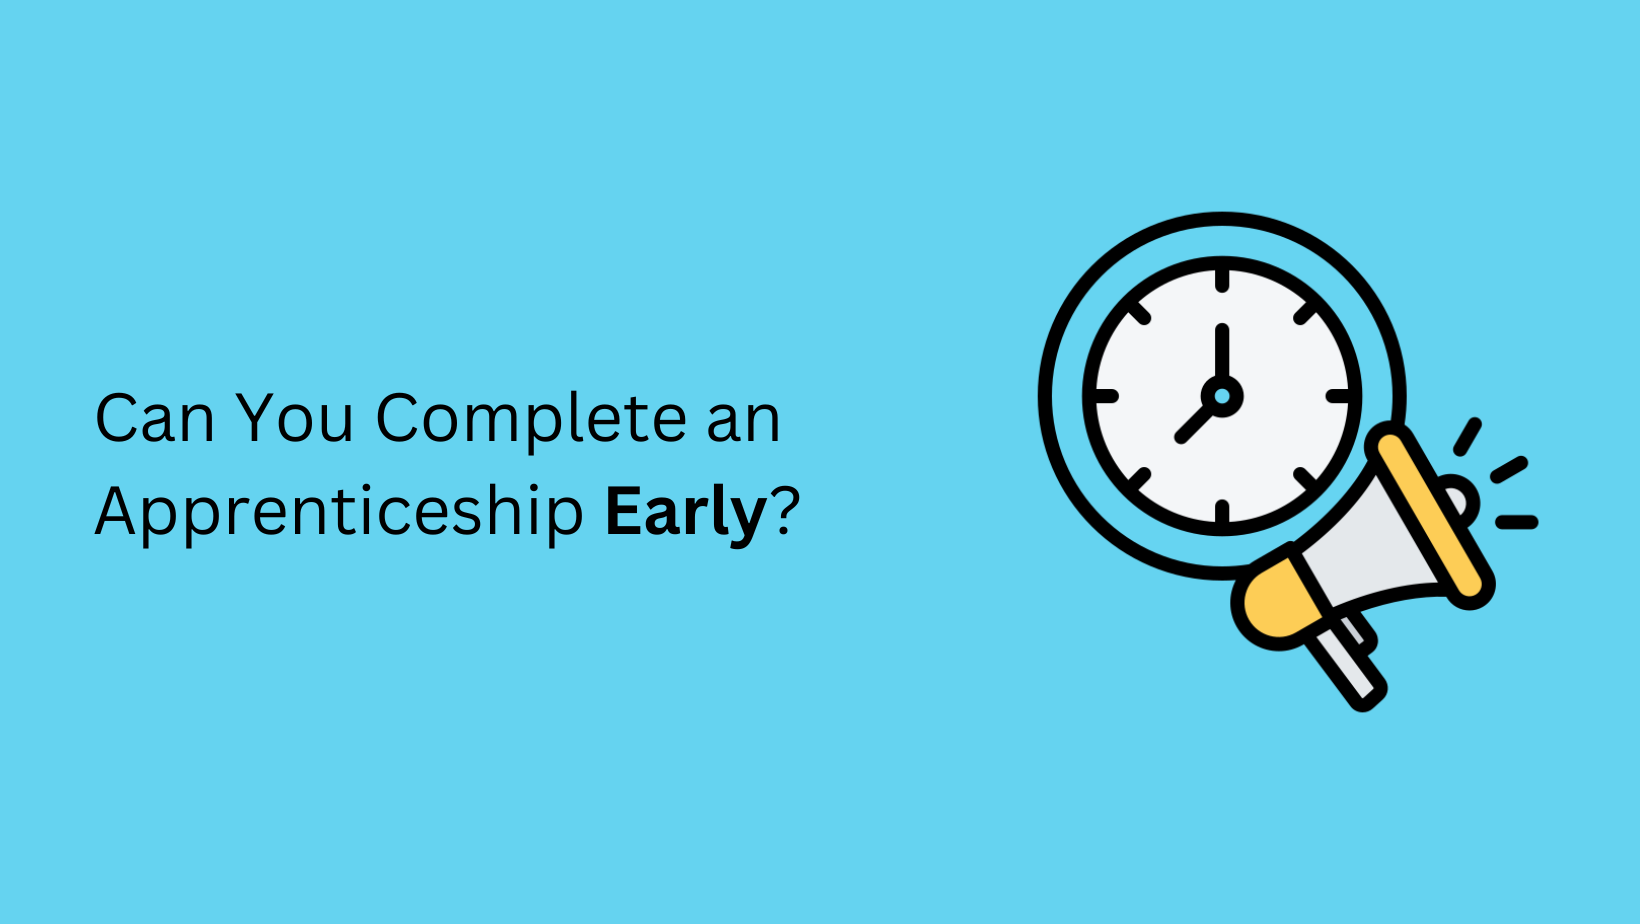 Can You Complete an Apprenticeship Early